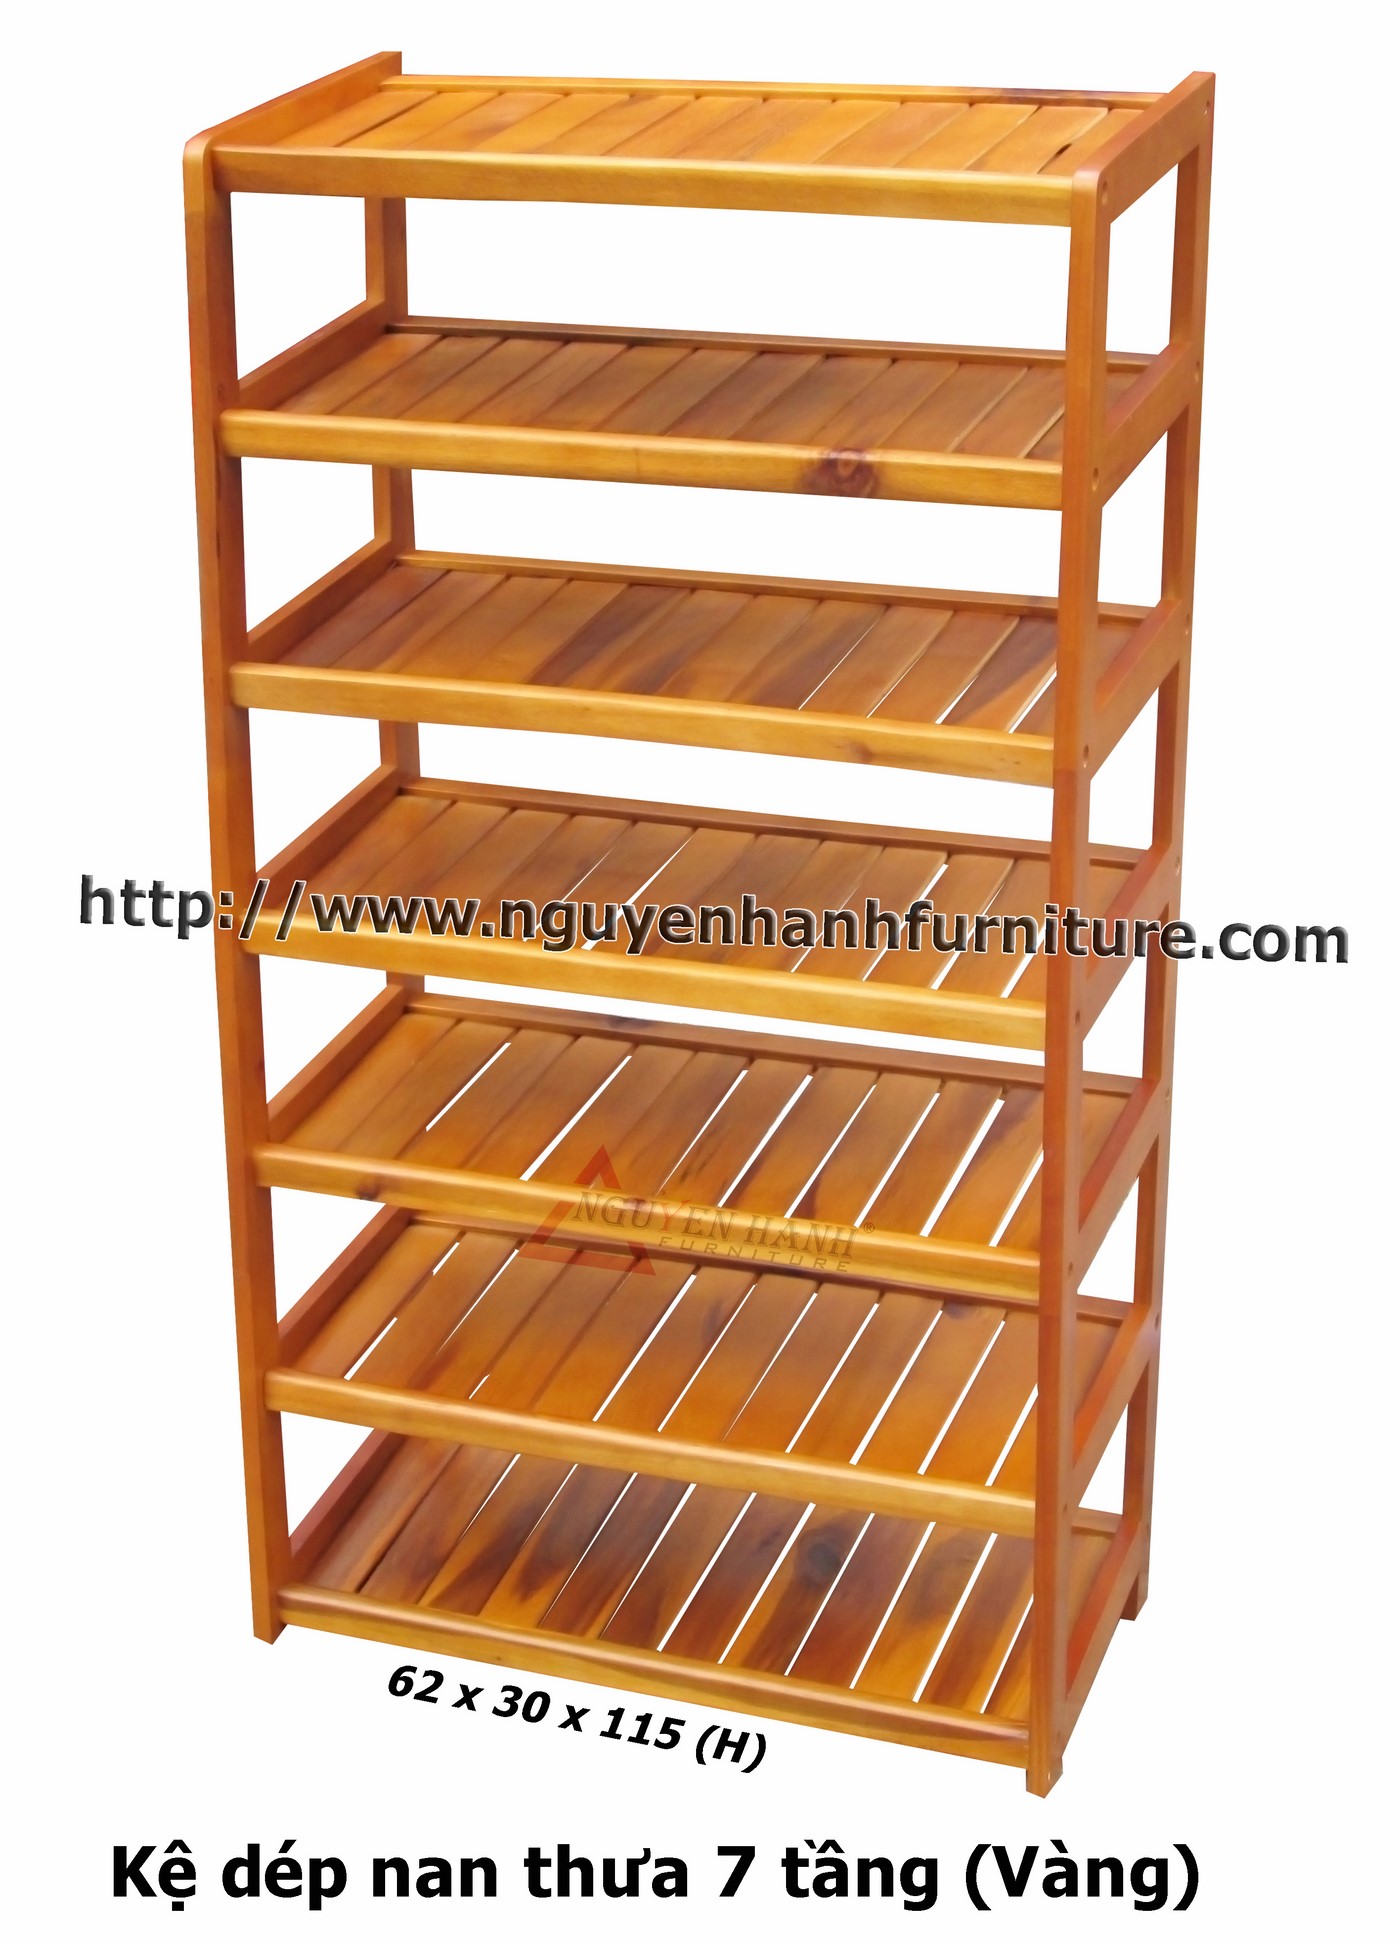 Name product: 7 storey Shoeshelf with sparse blades (yellow) -  Dimensions: 62 x 30 x 115 (H) - Description: Wood natural rubber